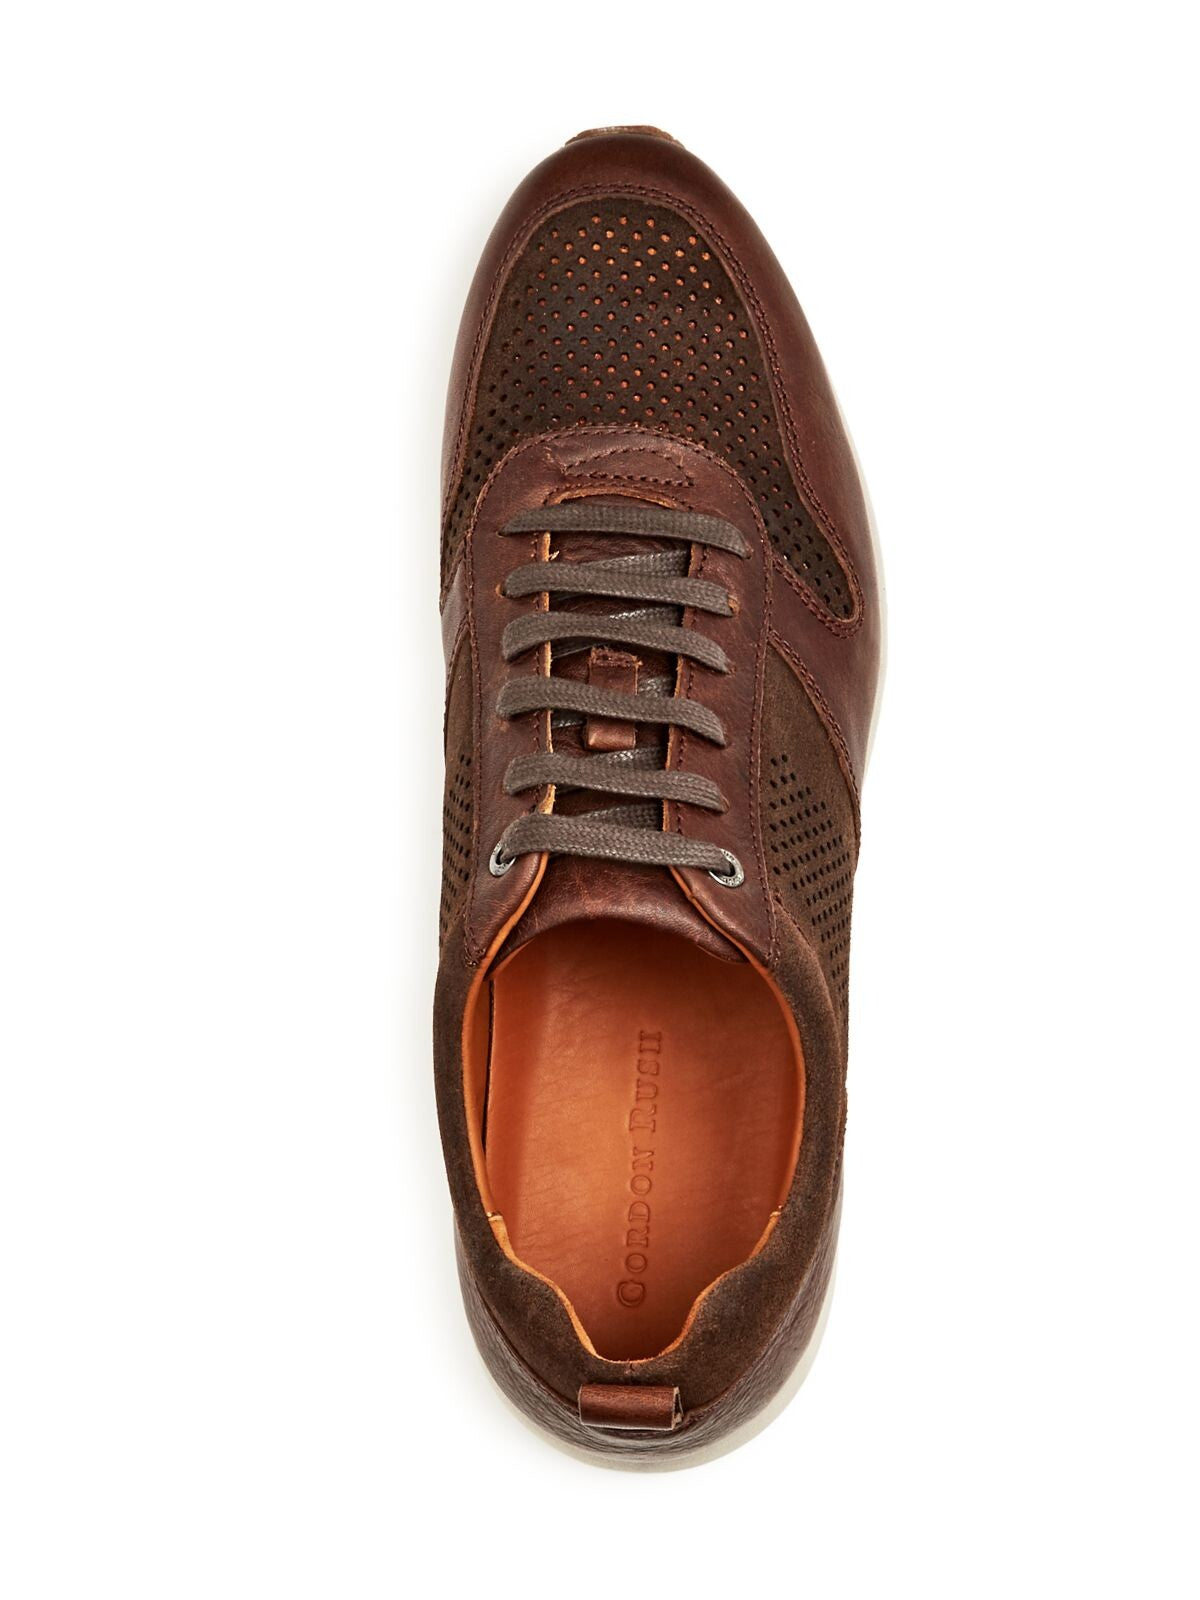 GORDON RUSH Mens Brown Removable Insole Perforated Rubin Round Toe Wedge Lace-Up Leather Athletic Sneakers Shoes 9